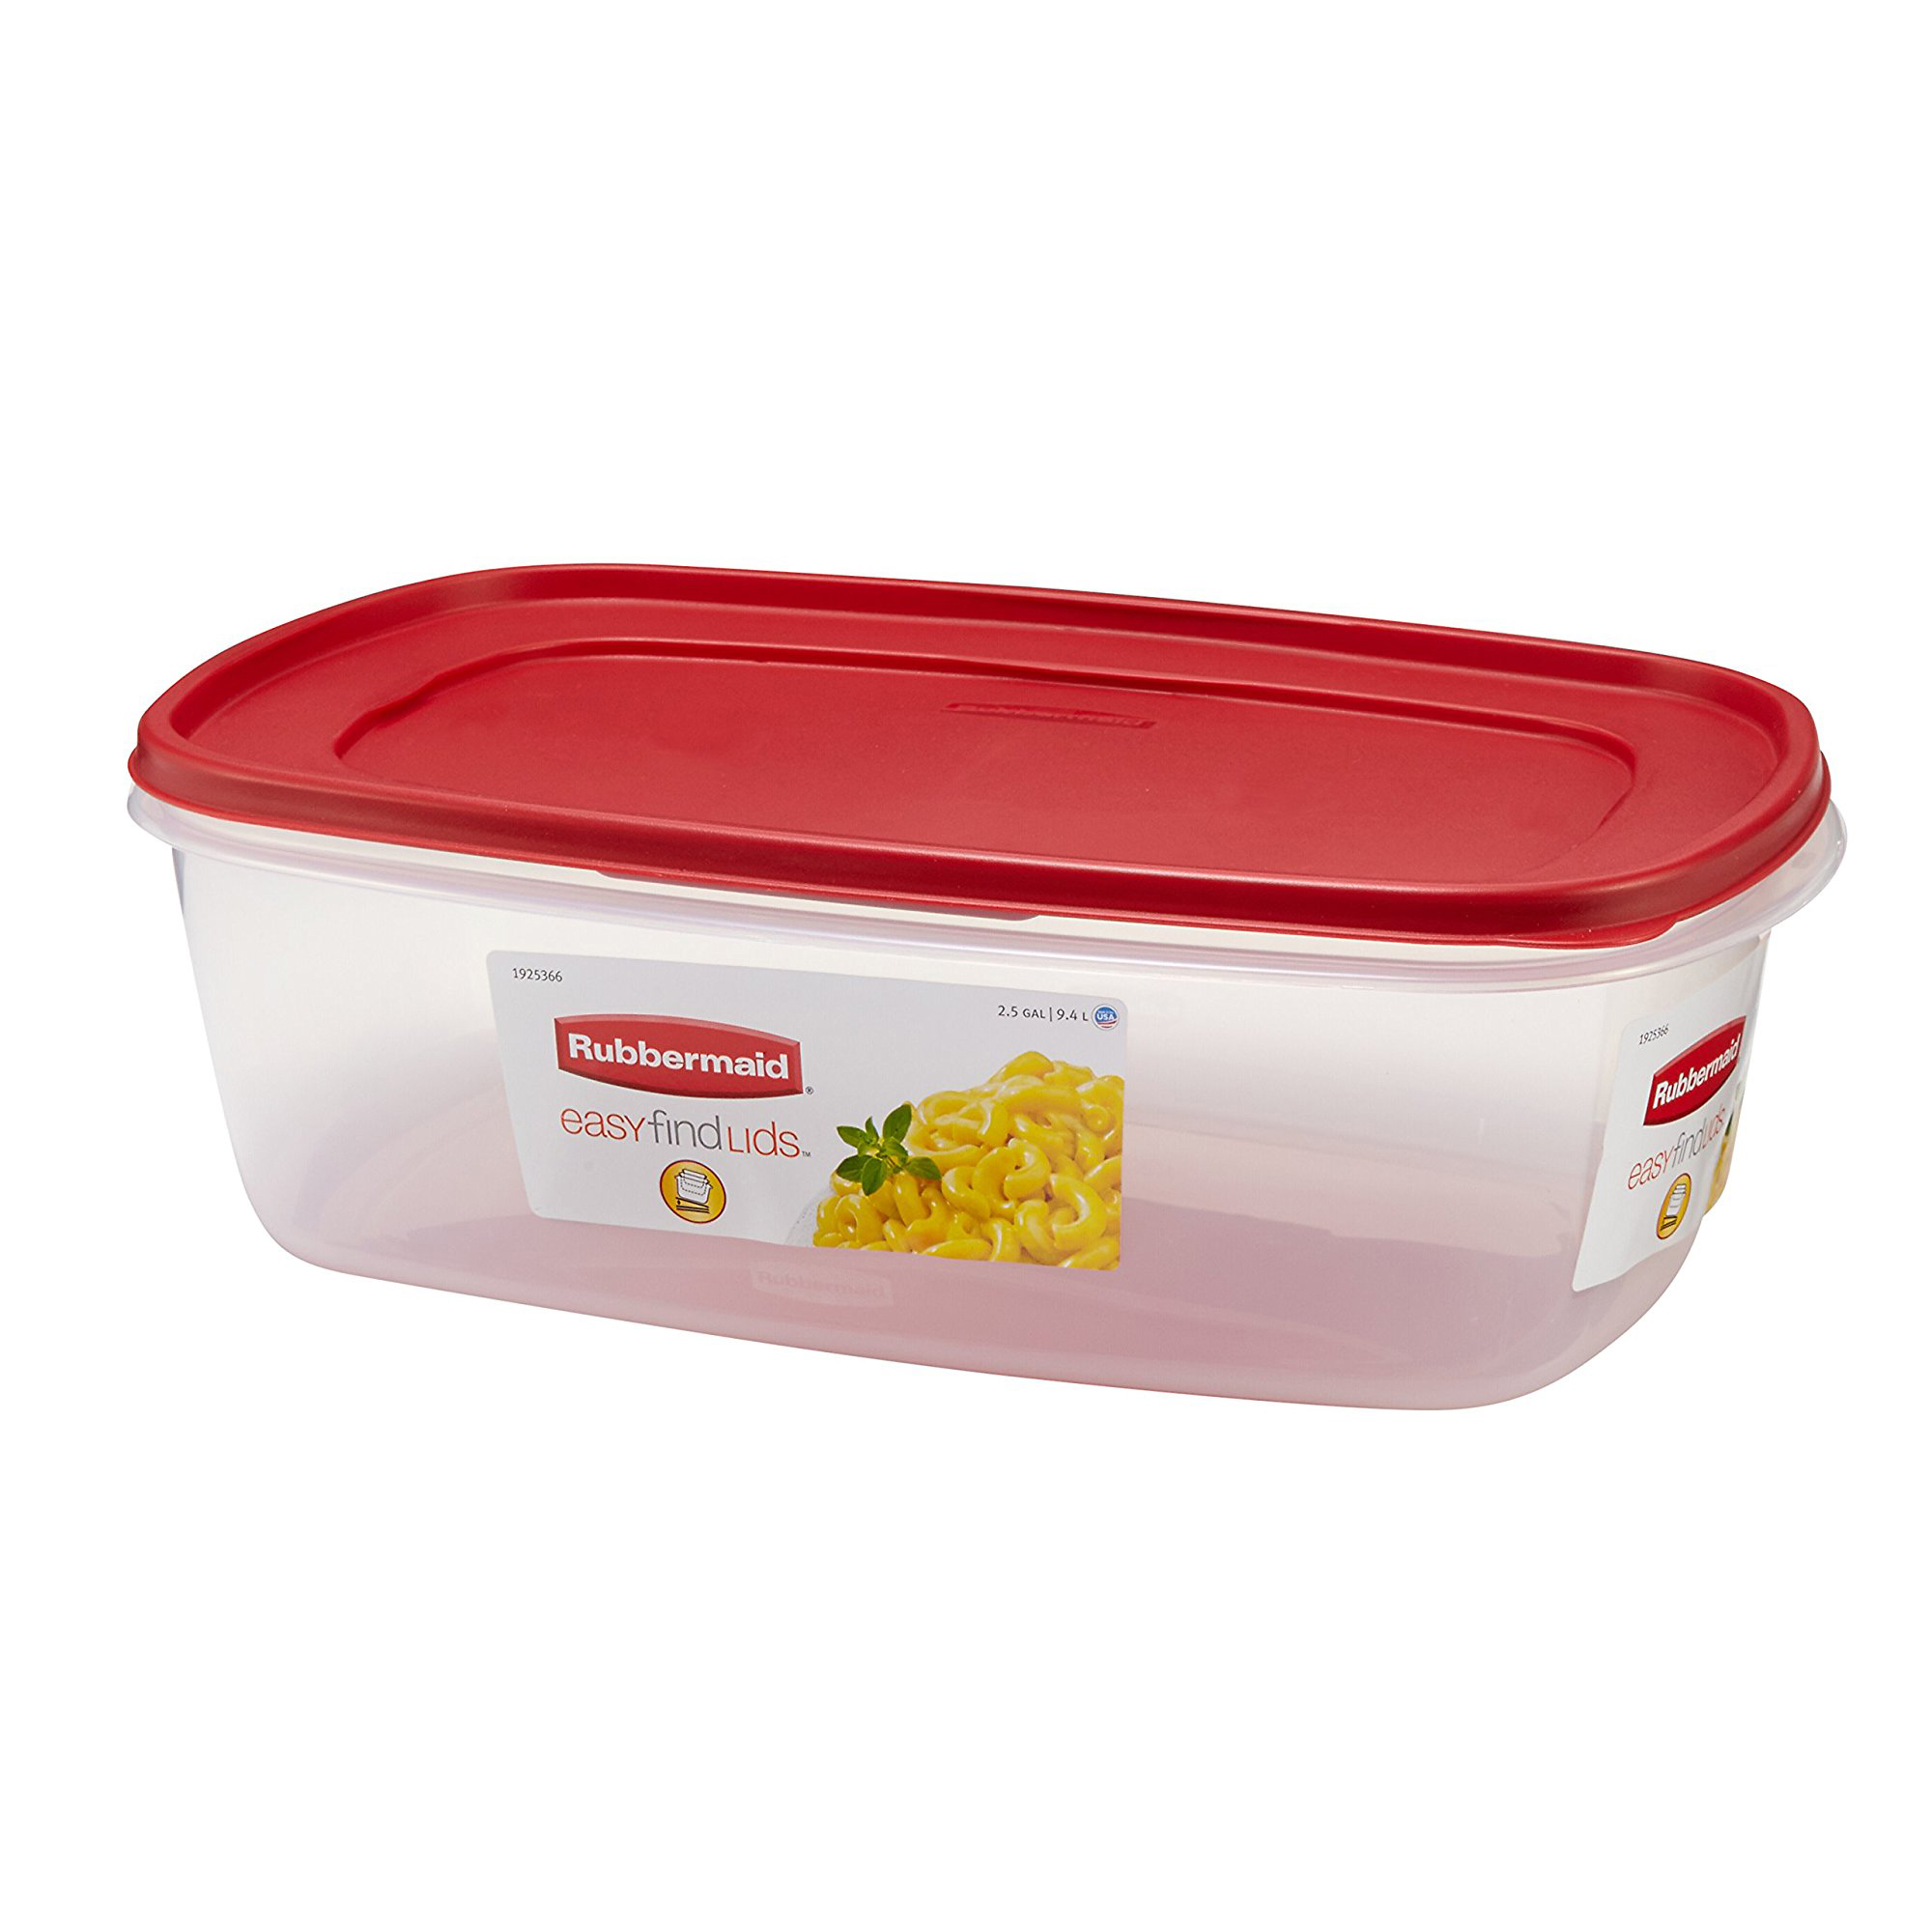 Rubbermaid Easy Find Lids Food Storage Container, Large with Red Lid, 2.5 Gallon - image 3 of 8